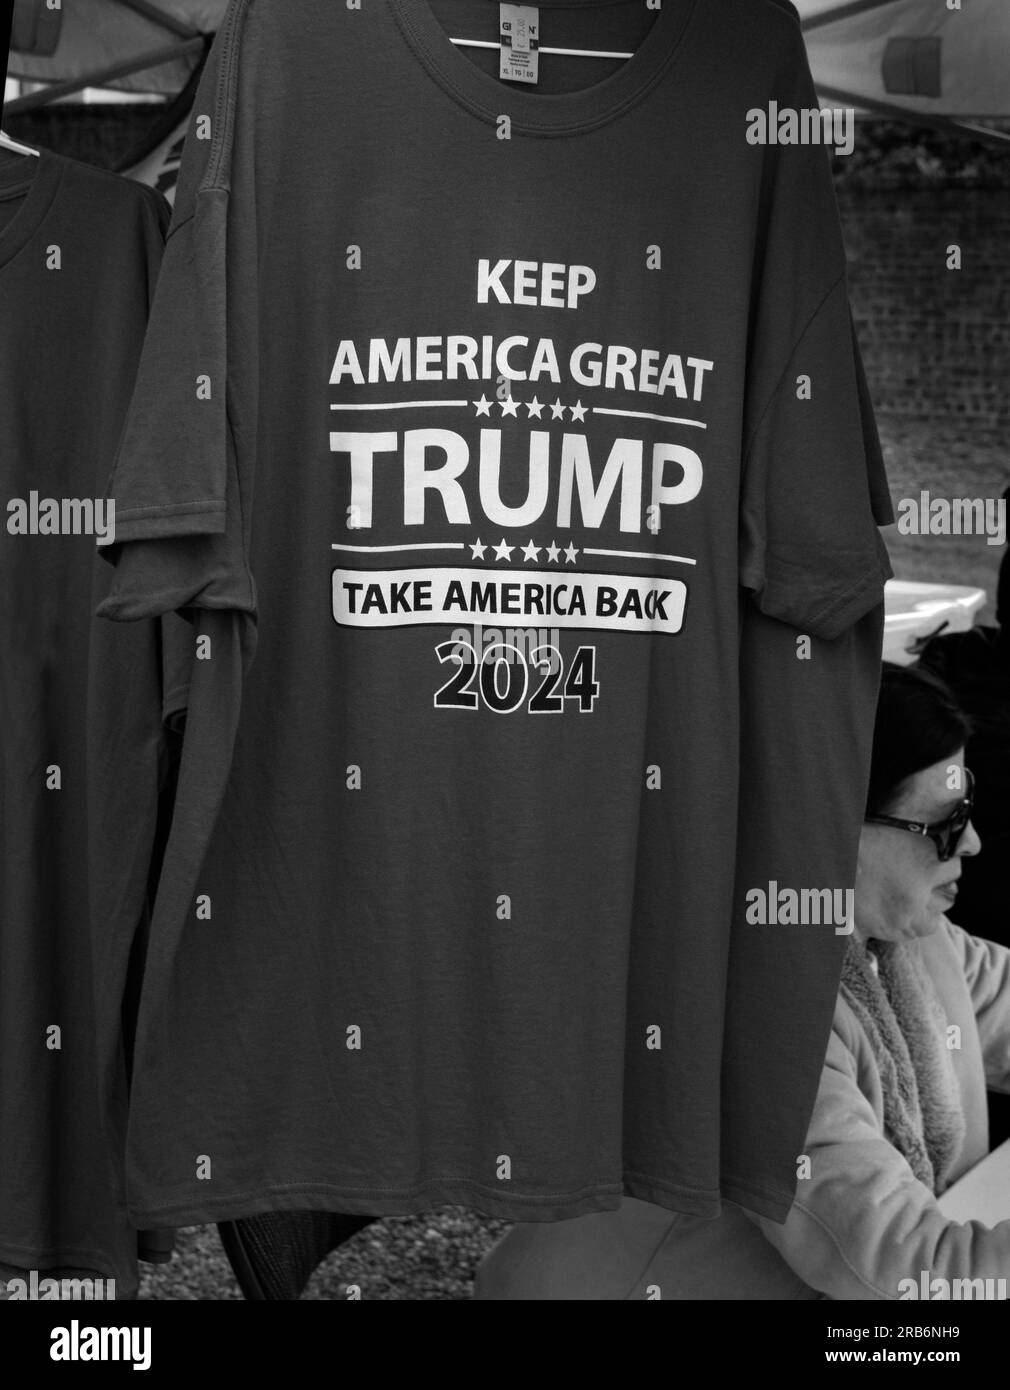 Supporters of former US President Donald Trump sell T-shirts promoting Trump's election in 2024 at a public event in Abingdon, Virginia, USA Stock Photo